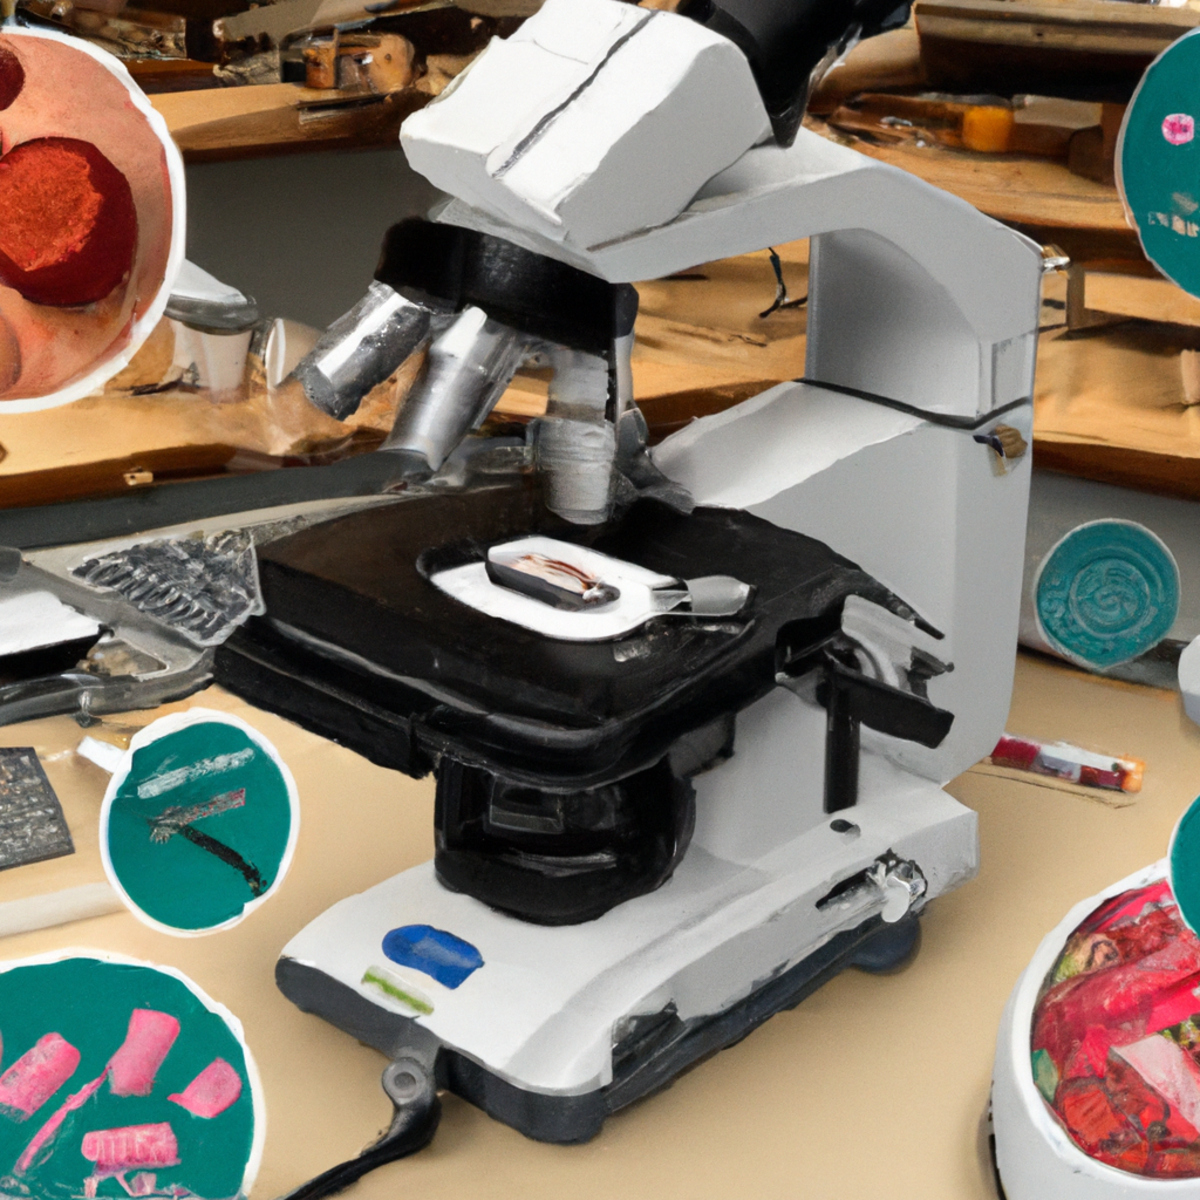 Lab setting with microscope, test tubes, petri dishes, computer screen, textbooks, and research papers for Langerhans Cell Histiocytosis research.